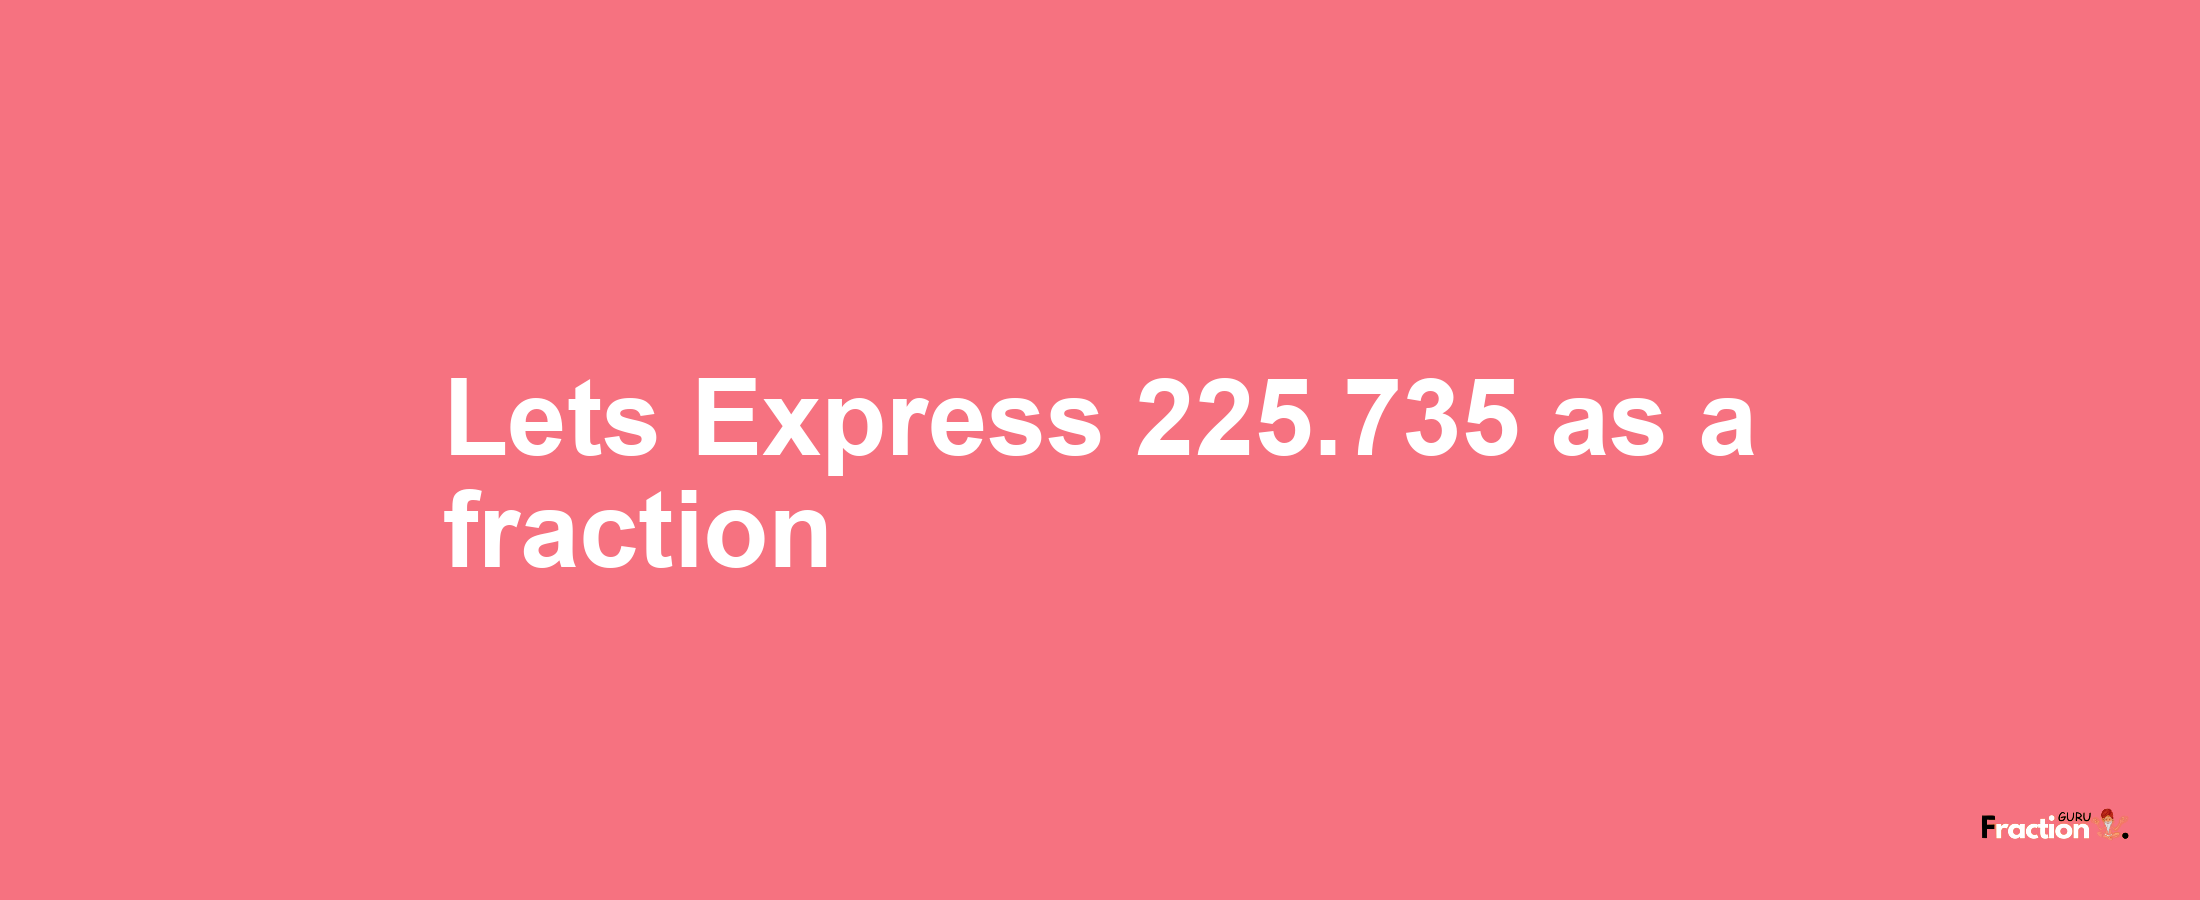 Lets Express 225.735 as afraction